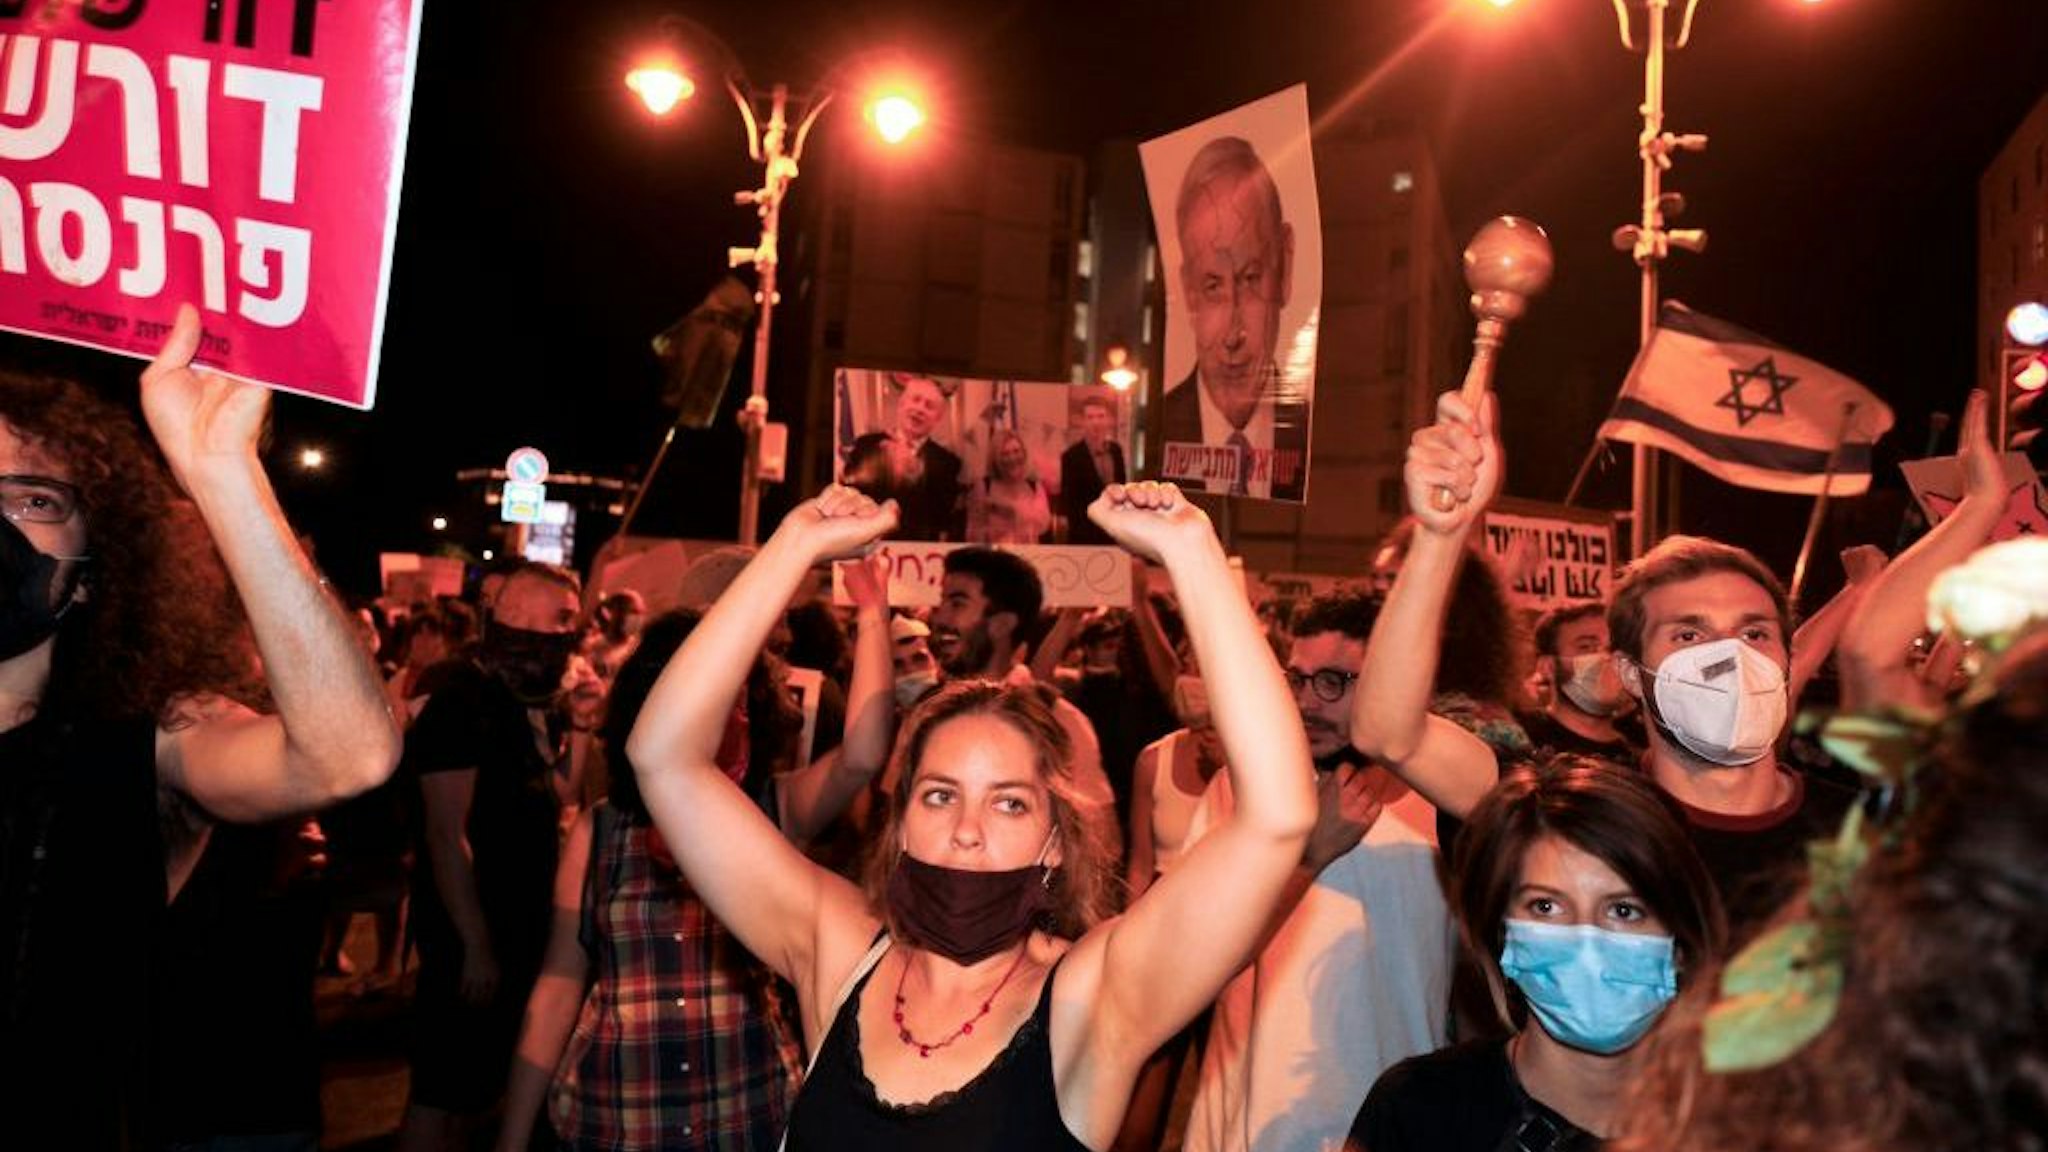 Protesters chant slogans during a demonstration of thousands against the Israeli government near the Prime Minister's residence in Jerusalem on August 2, 2020. - Thousands protested against Prime Minister Benjamin Netanyahu across Israel on Saturday night, demanding he resign over alleged corruption and a resurgence of coronavirus cases. (Photo by MENAHEM KAHANA / AFP)